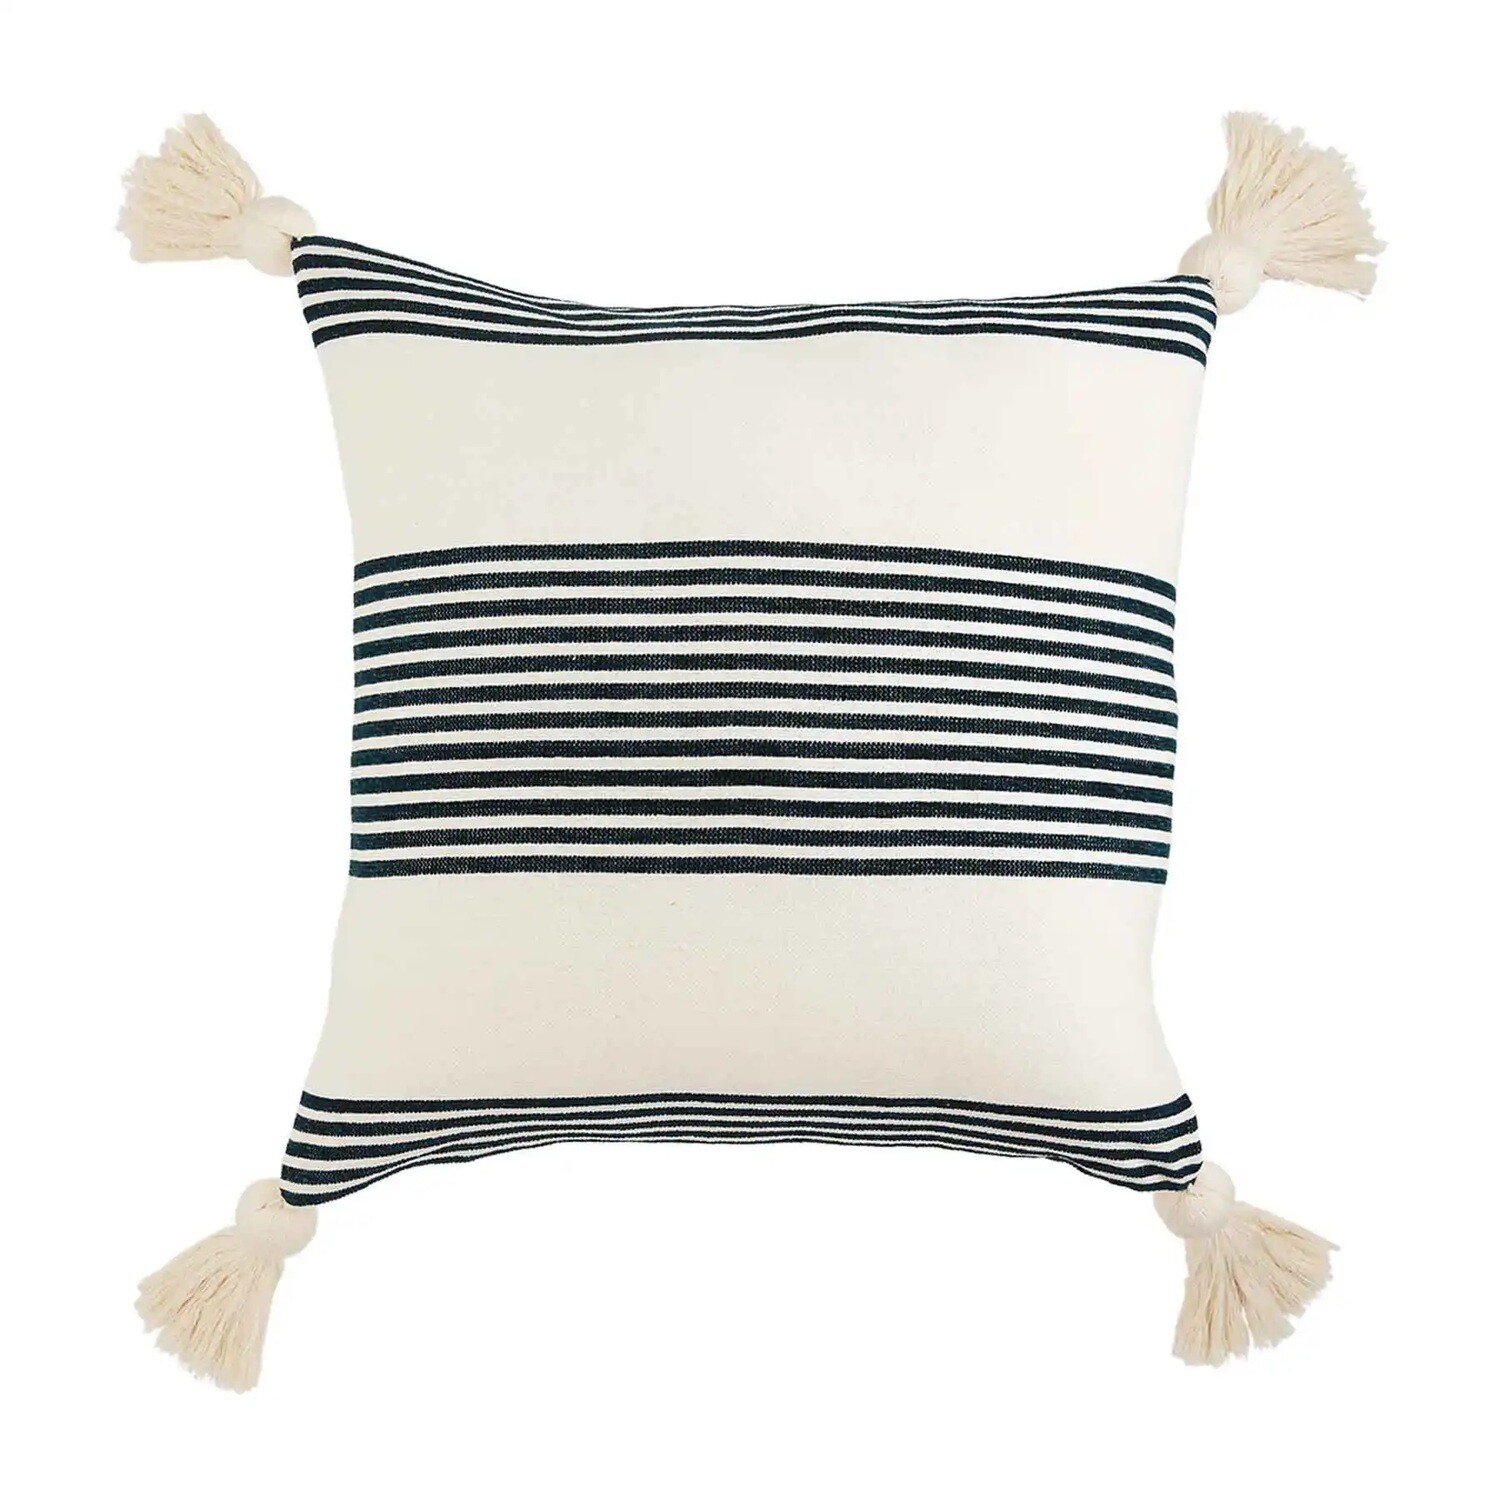 Pillow - Square With Tassels - Cream